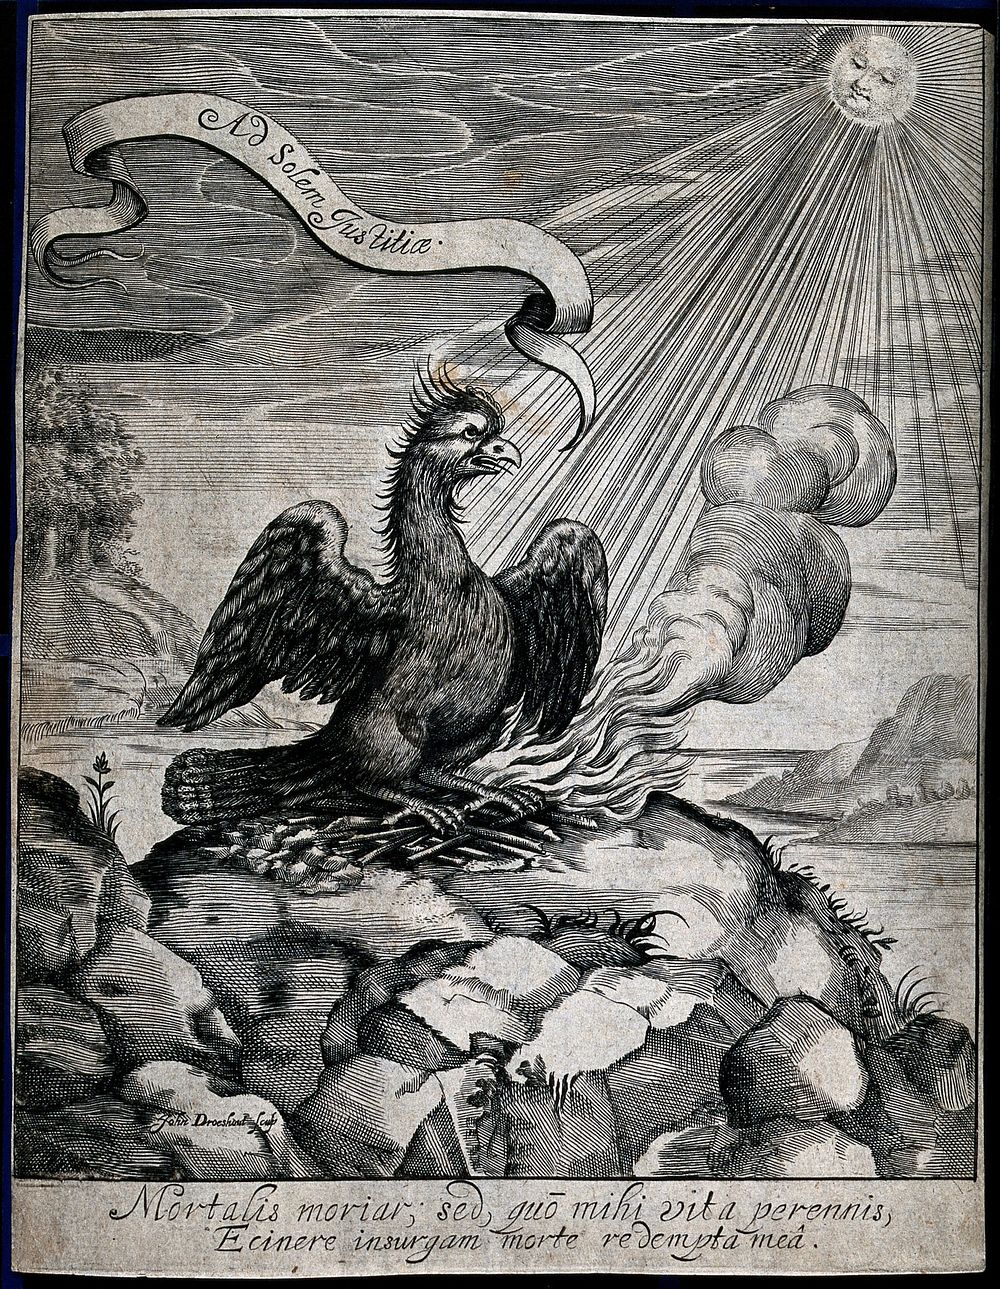 The phoenix immolating itself on a funeral pyre; representing rebirth and eternity. Engraving by J. Droeshout.